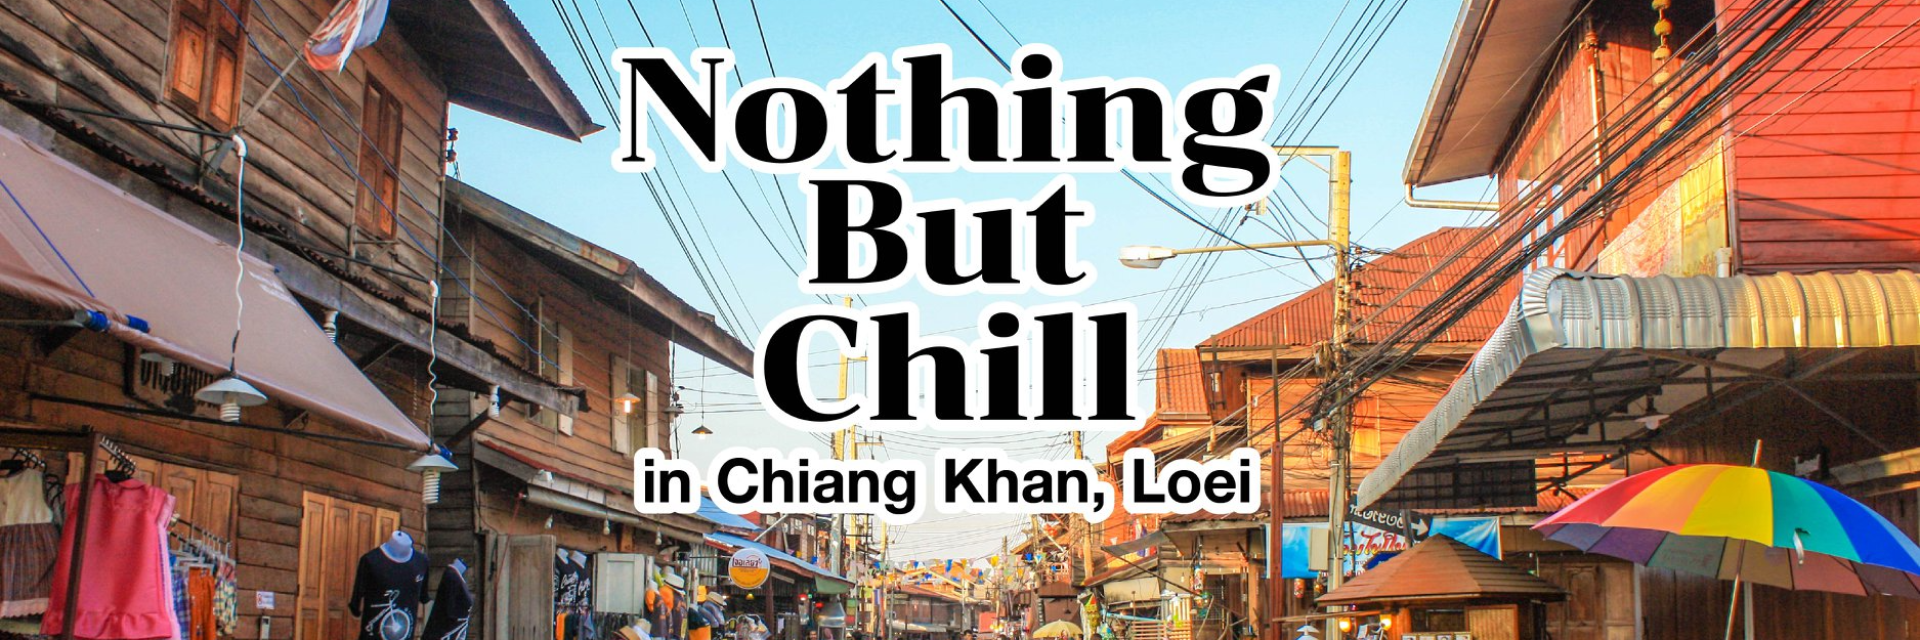 Nothing But Chill in Chiang Khan, Loei